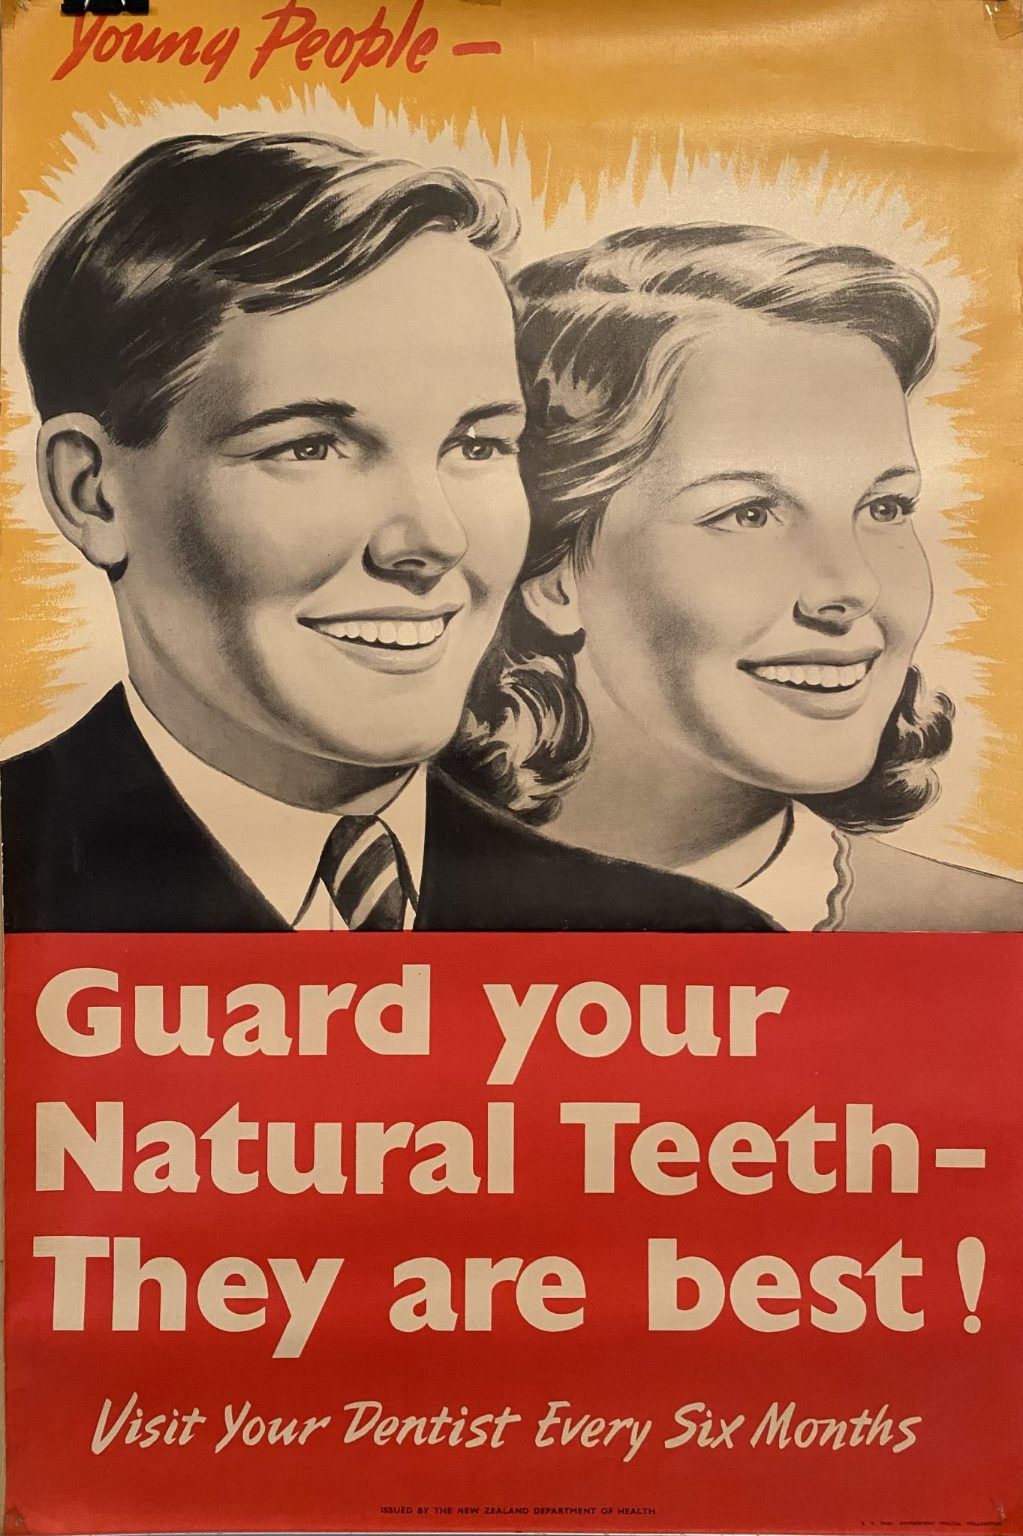 VINTAGE POSTER: New Zealand Department of Health / Visit the Dentist